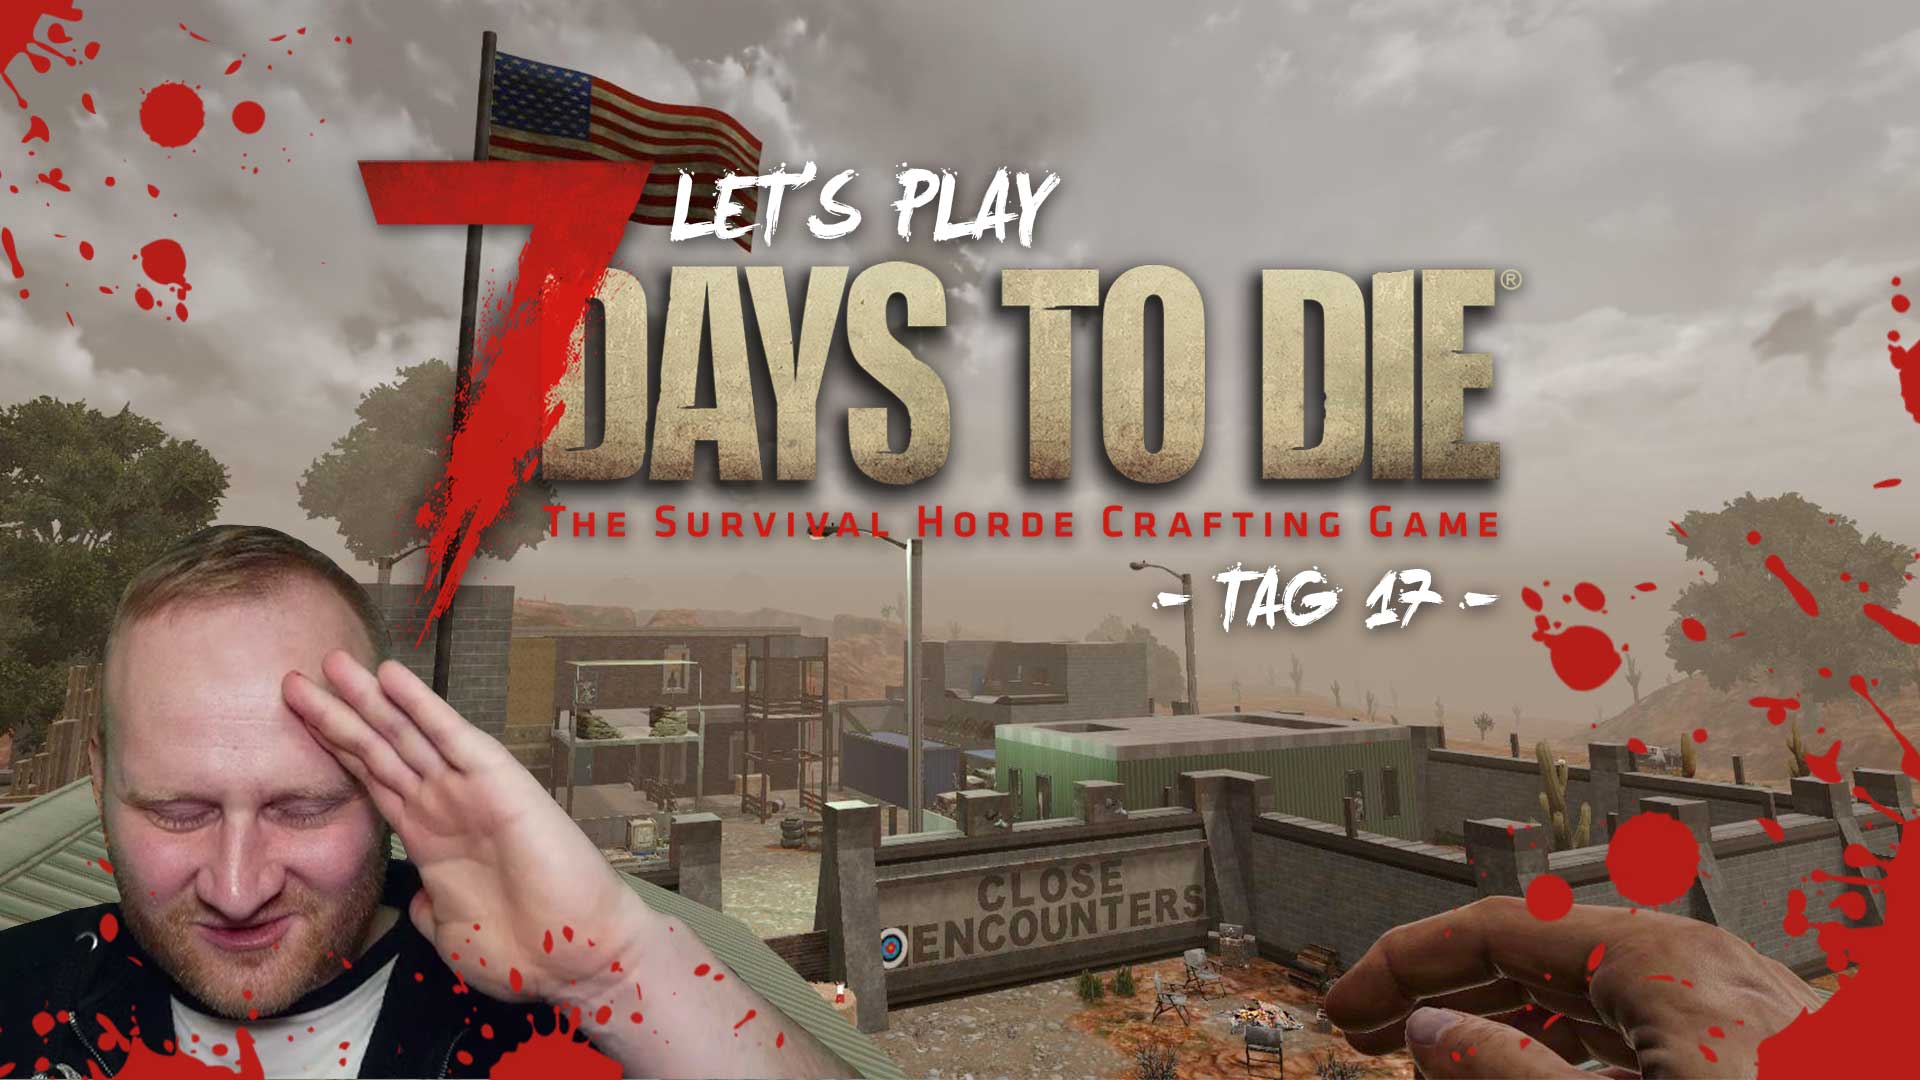 lets play 7 days to die tag 17 GG